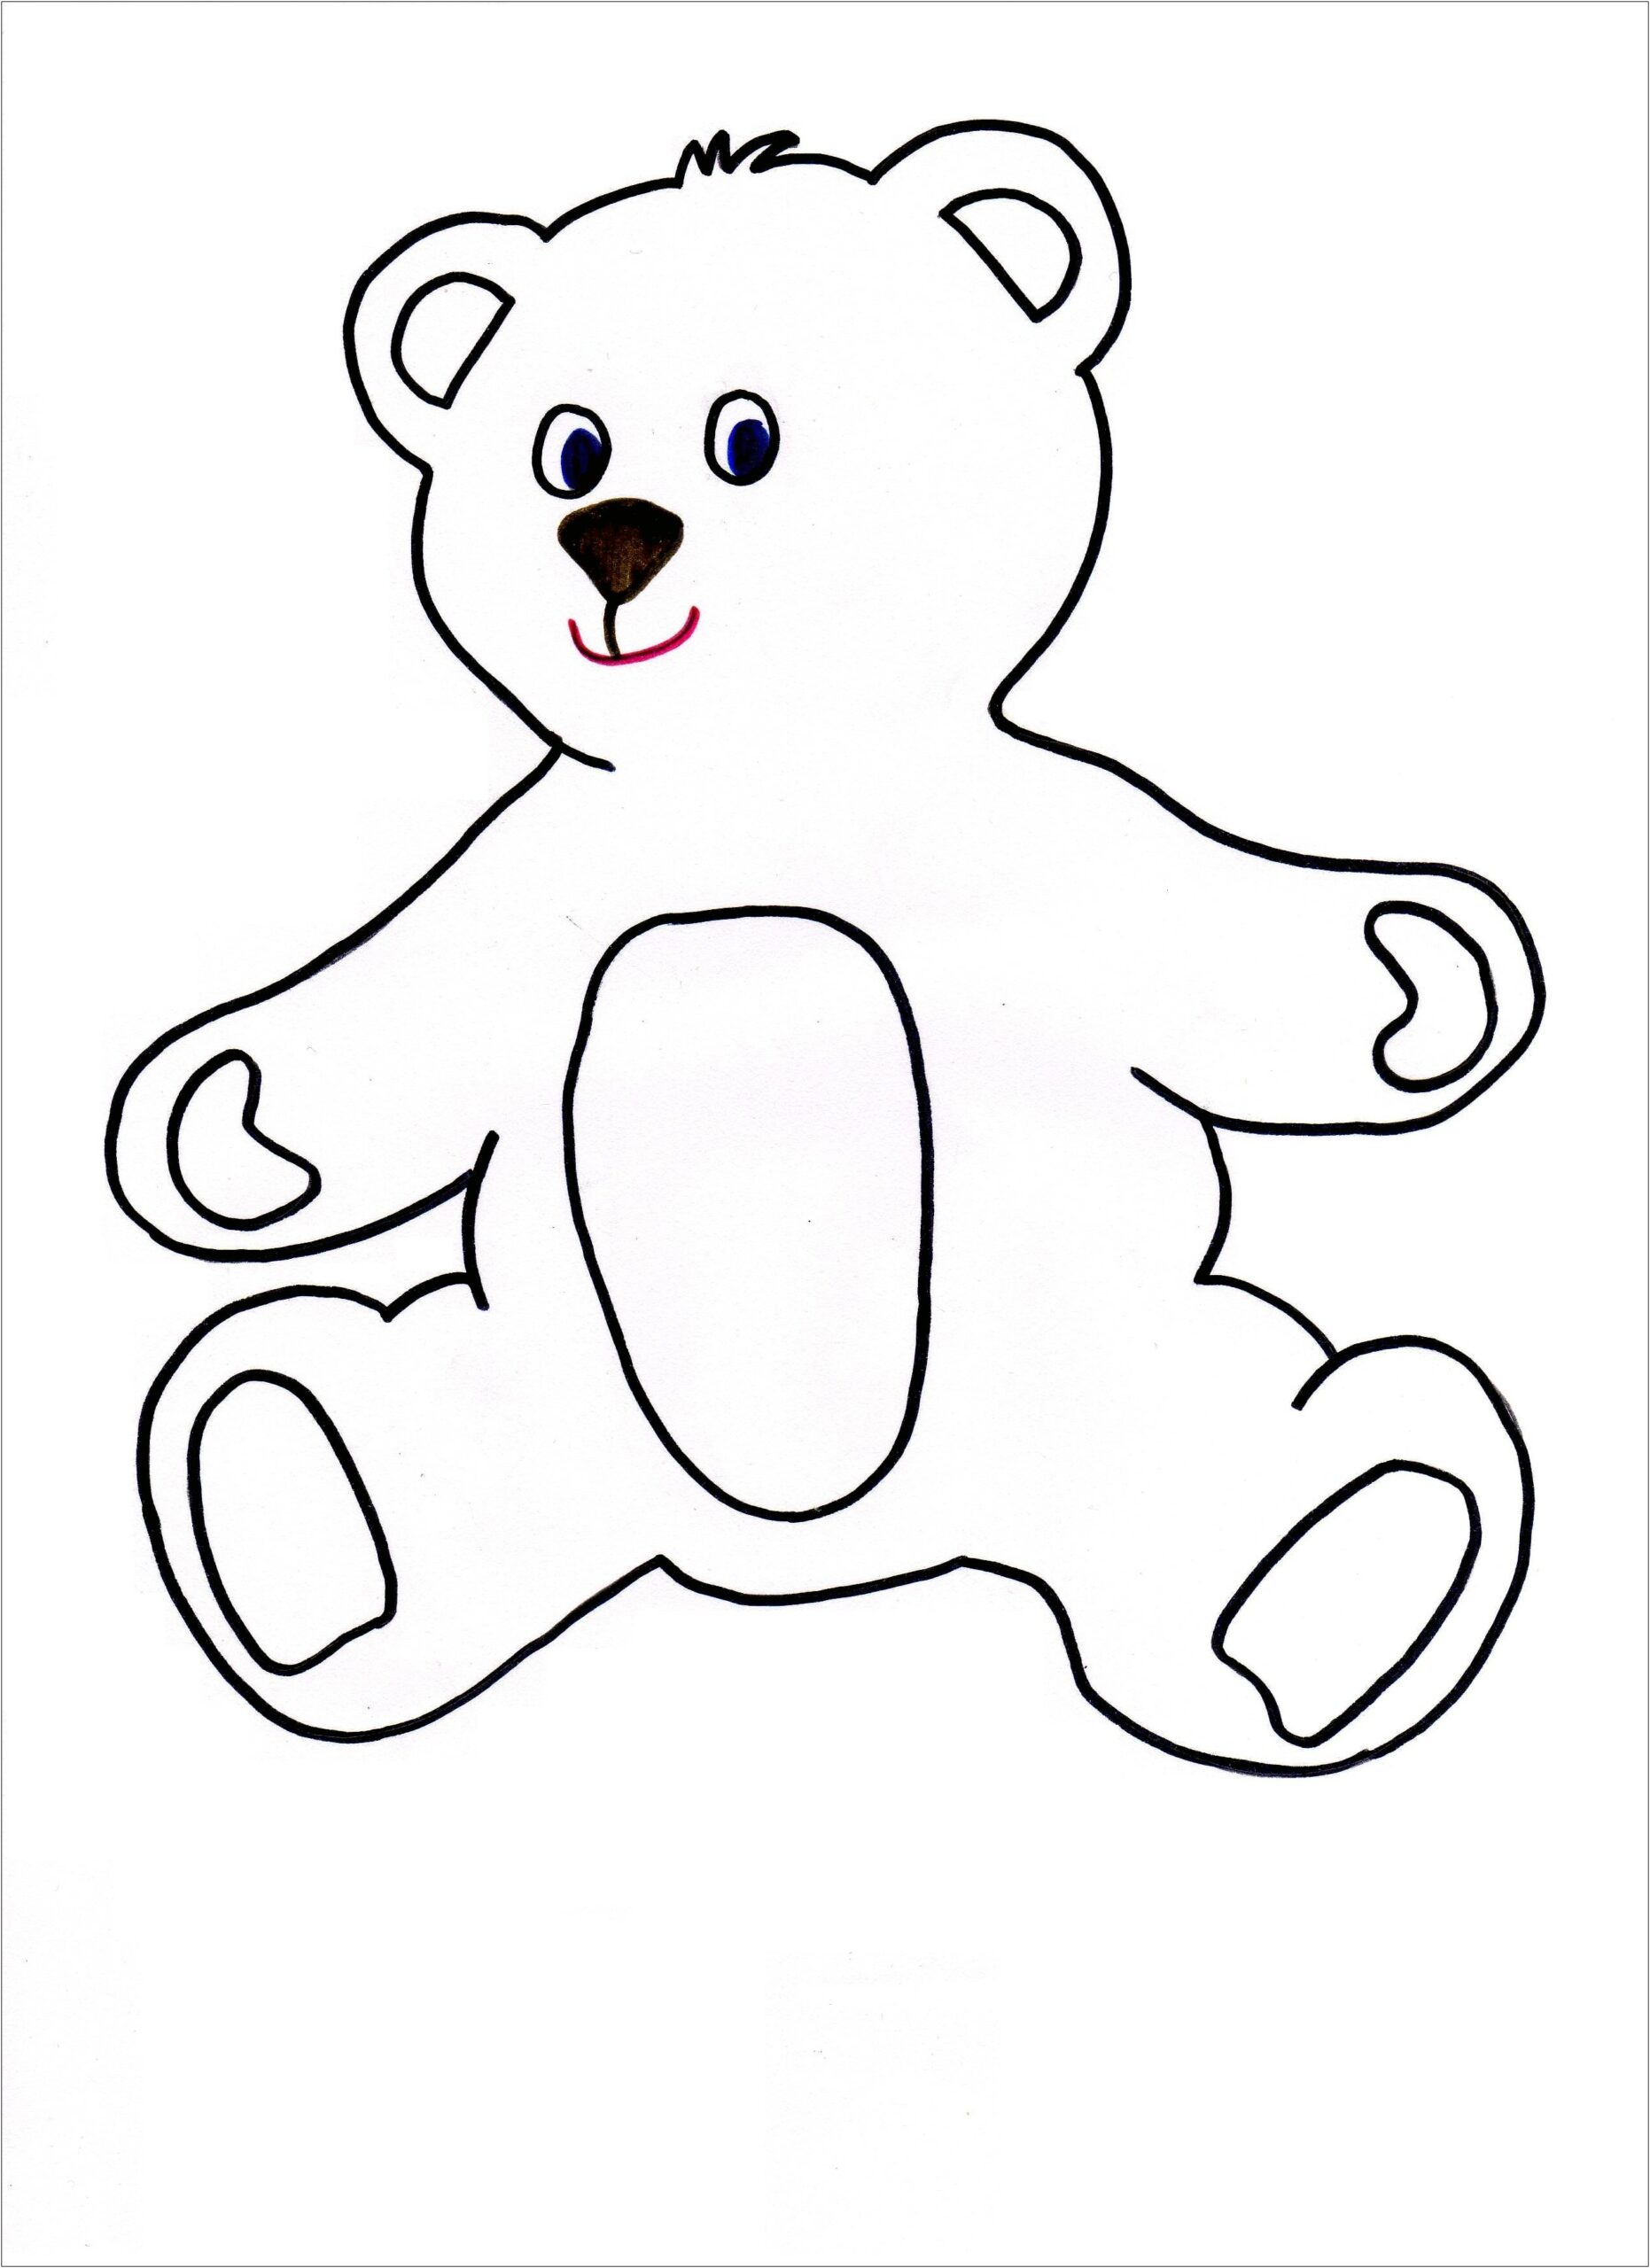 Bear Template With Lines For Writing Free